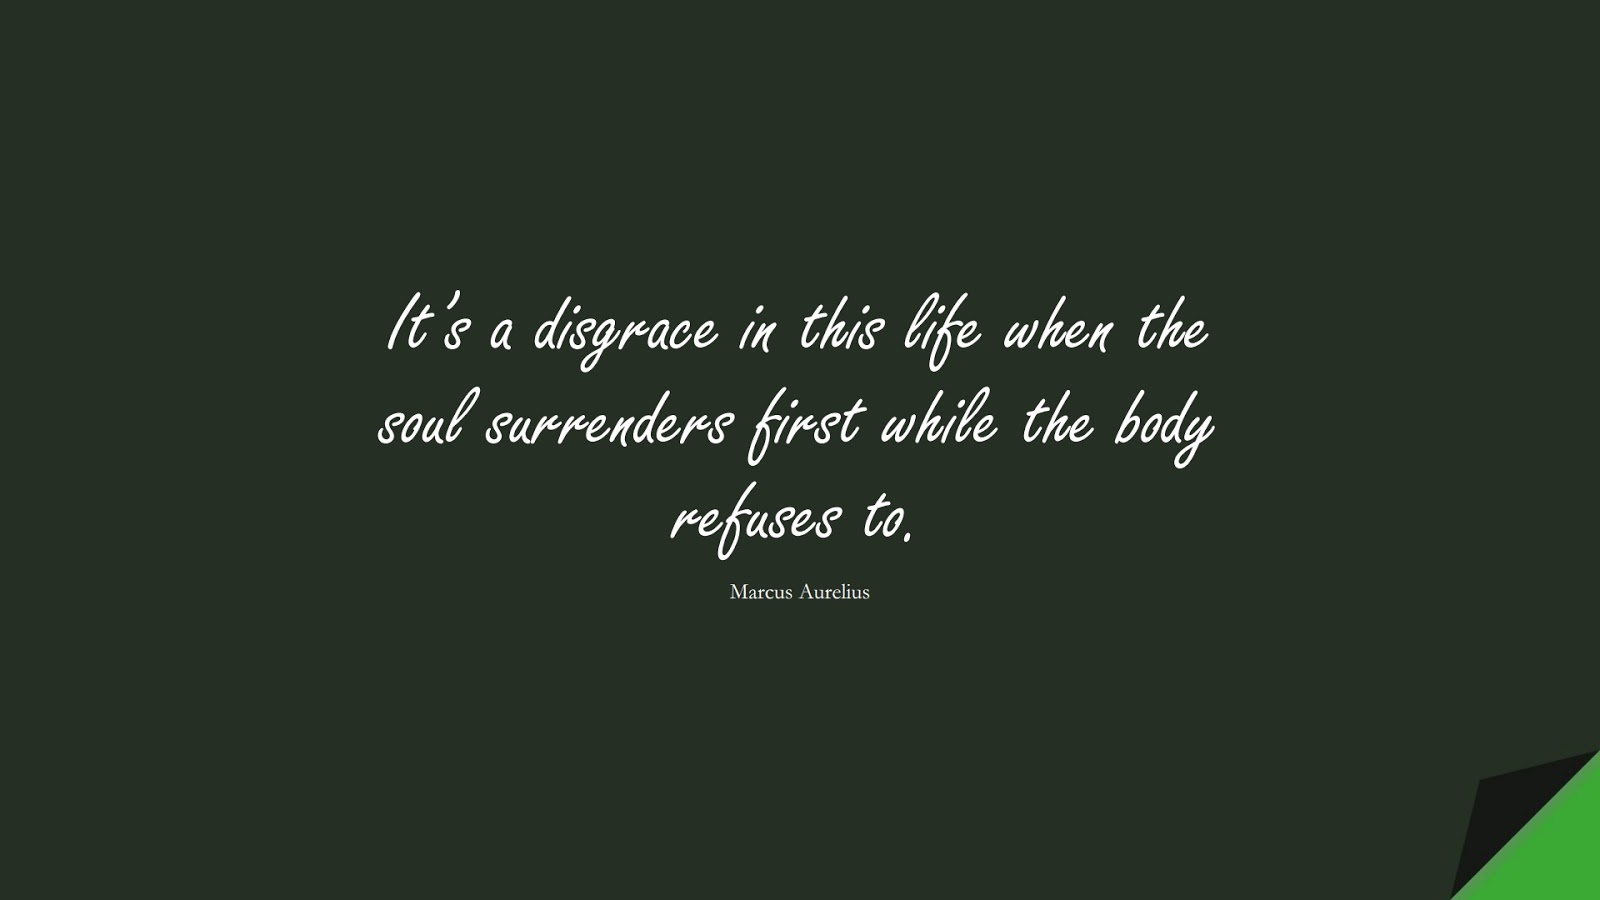 It’s a disgrace in this life when the soul surrenders first while the body refuses to. (Marcus Aurelius);  #NeverGiveUpQuotes